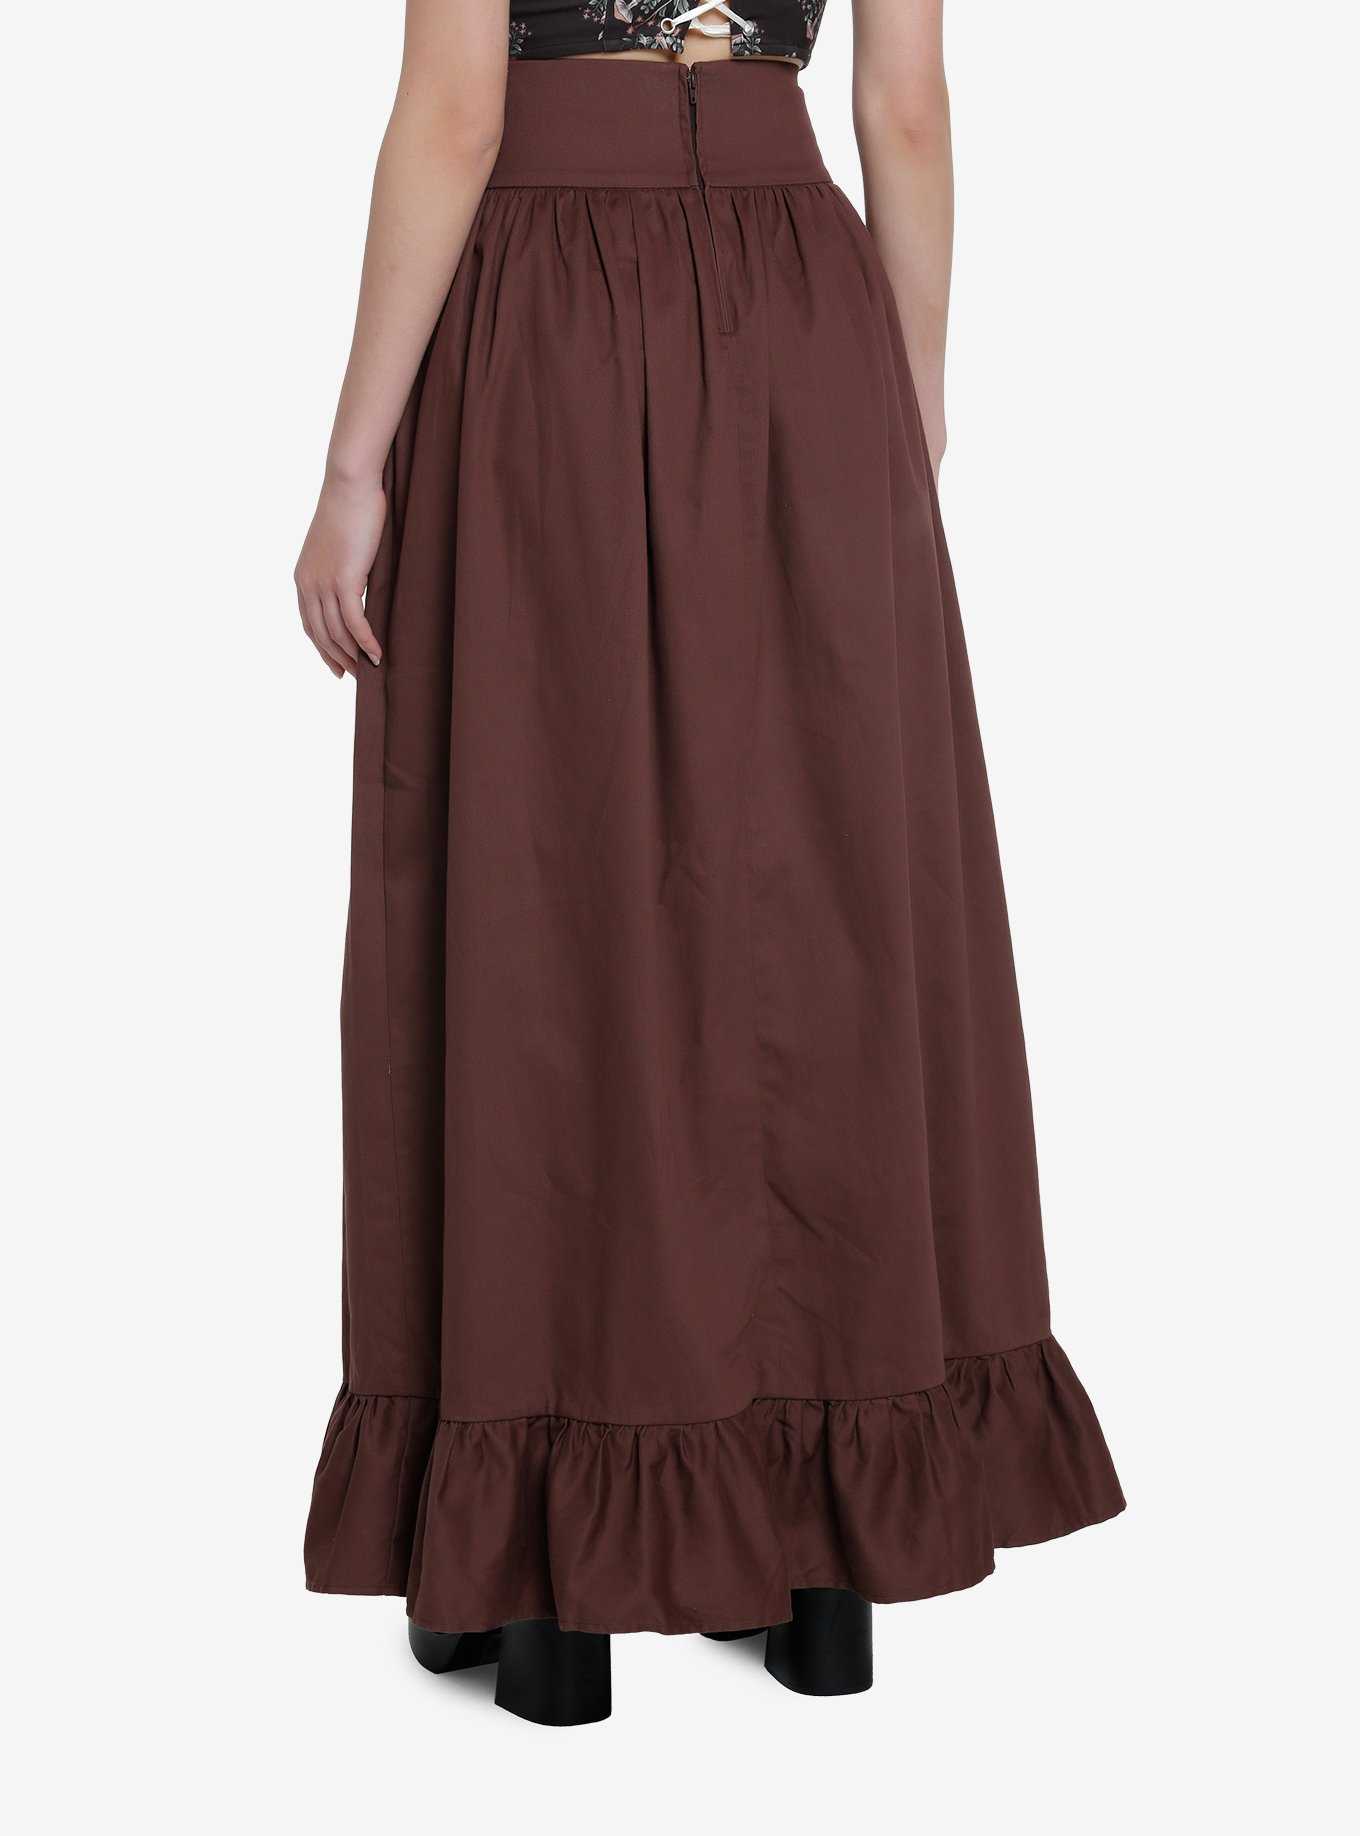 Thorn & Fable Brown Lace-Up Maxi Skirt, , hi-res